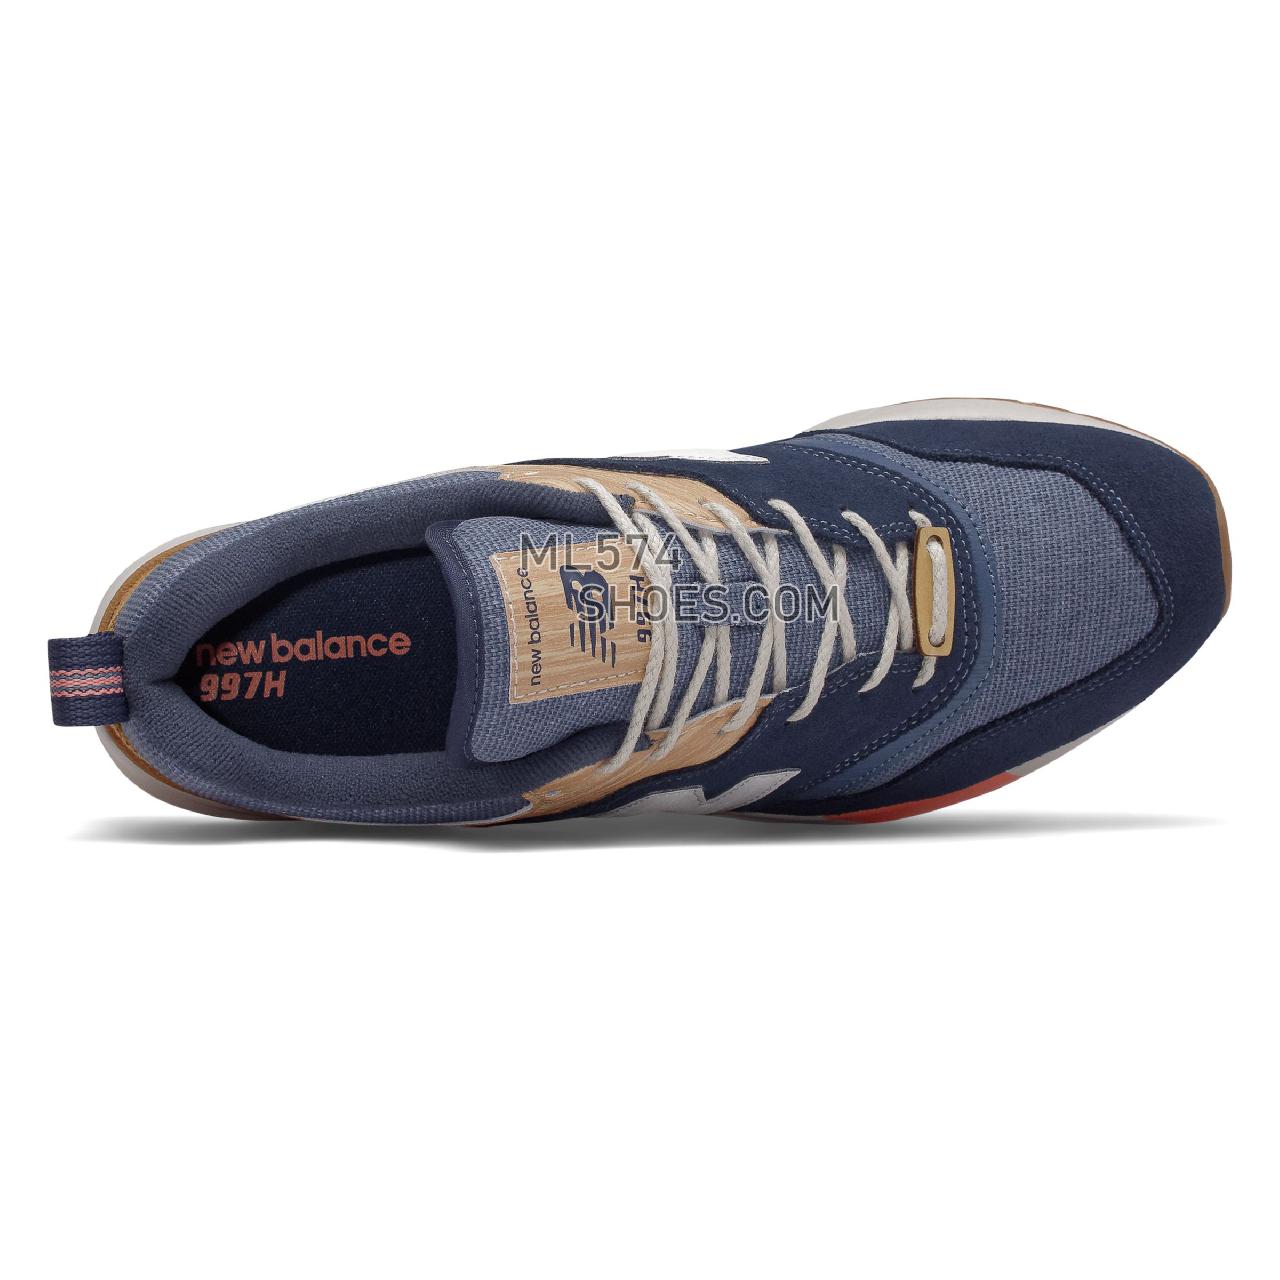 New Balance 997H Spring Hike - Men's Classic Sneakers - Navy with Workwear and White - CM997HAK